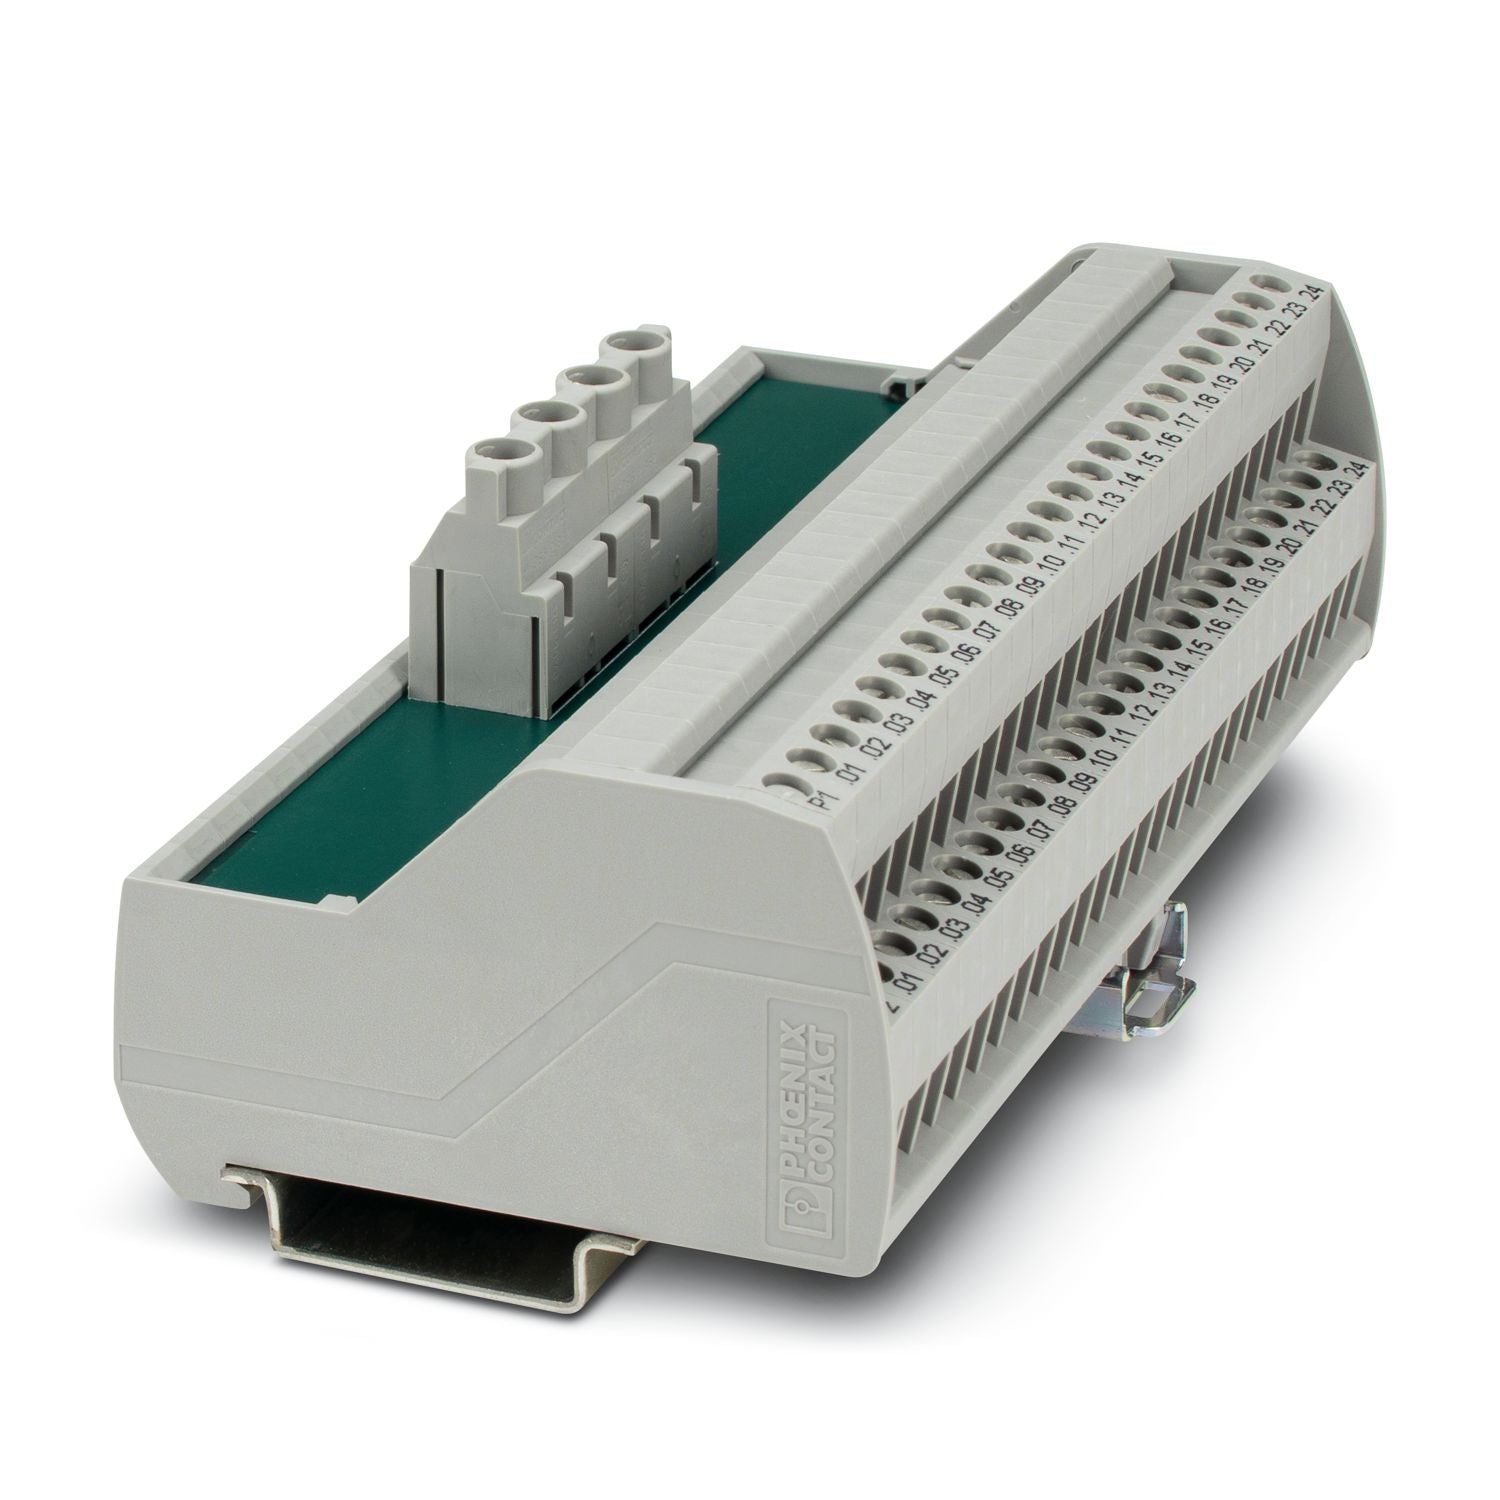 2903717 | Phoenix Contact | VARIOFACE Module with two equipotential busbars for potential distribution